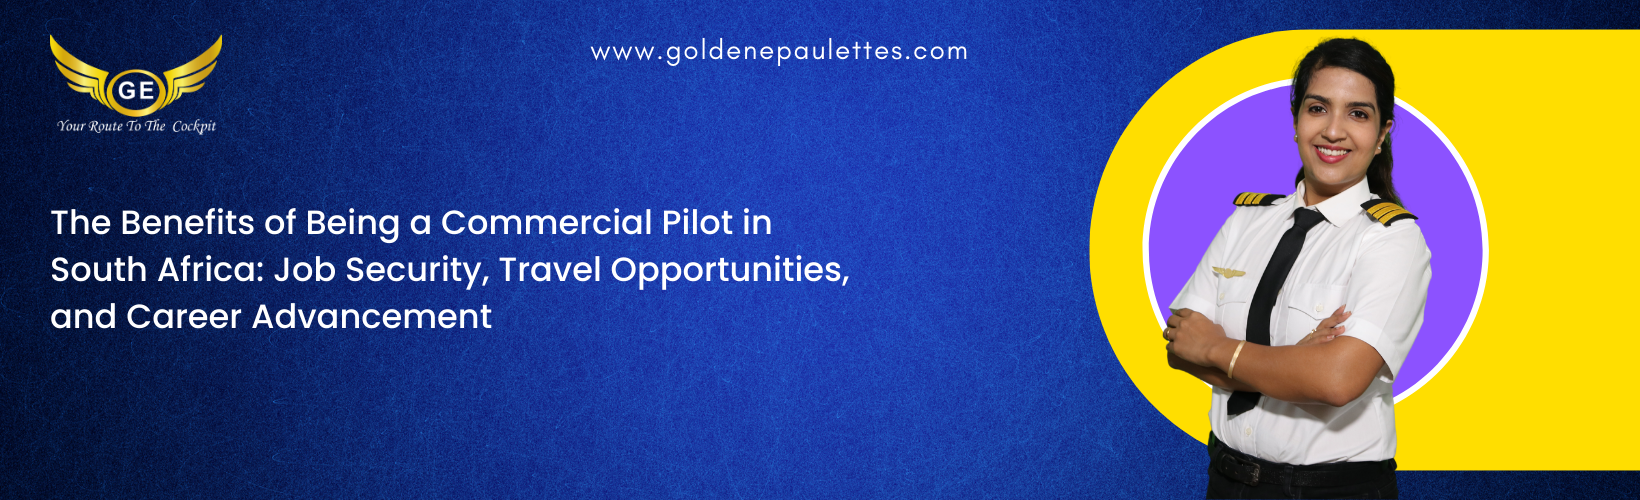 What Are the Benefits of Being a Commercial Pilot in South Africa